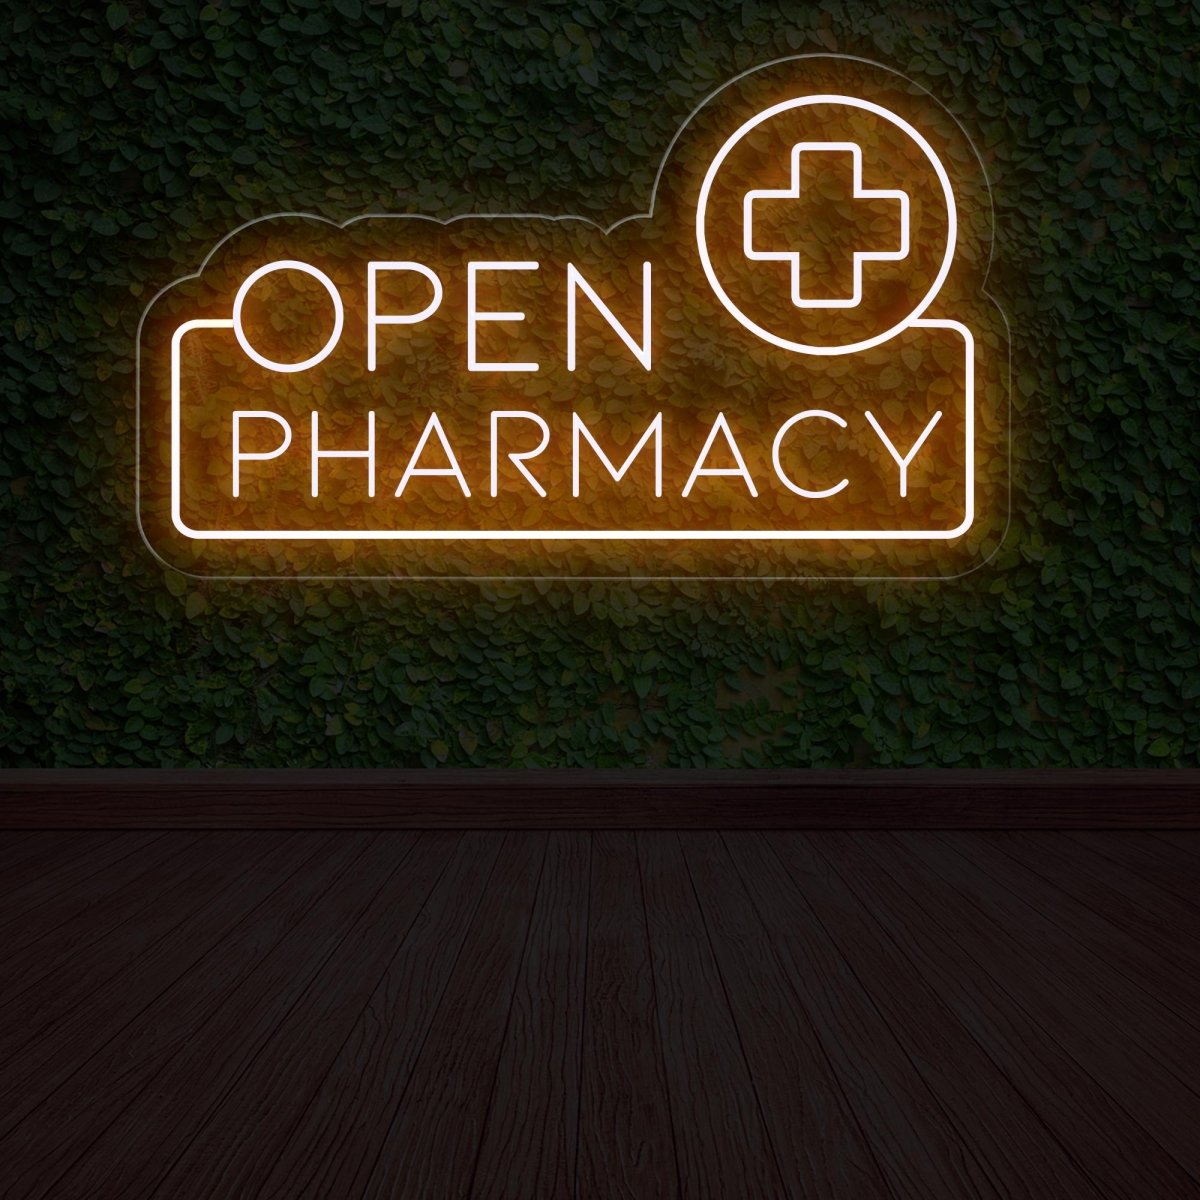 Pharmacy Open LED Neon Sign | Bright Window Business Signage - NEONXPERT